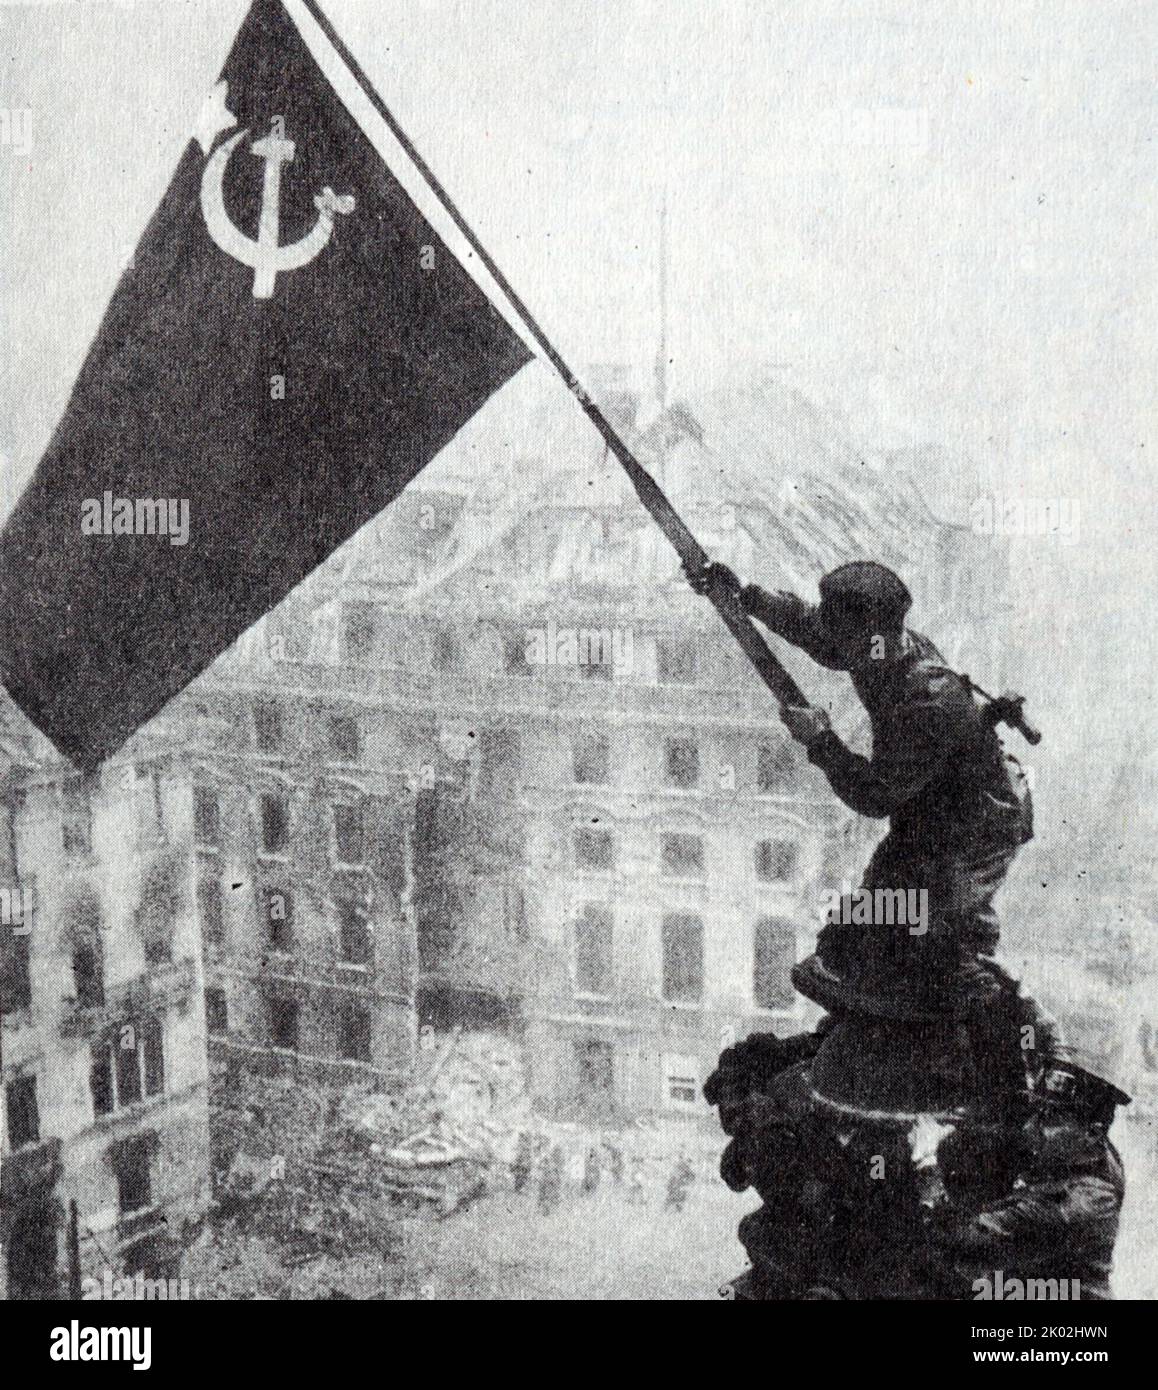 Banner of Victory over Reichstag in Berlin. Soviet troops wave red flag over Berlin at the end of World War Two. Stock Photo